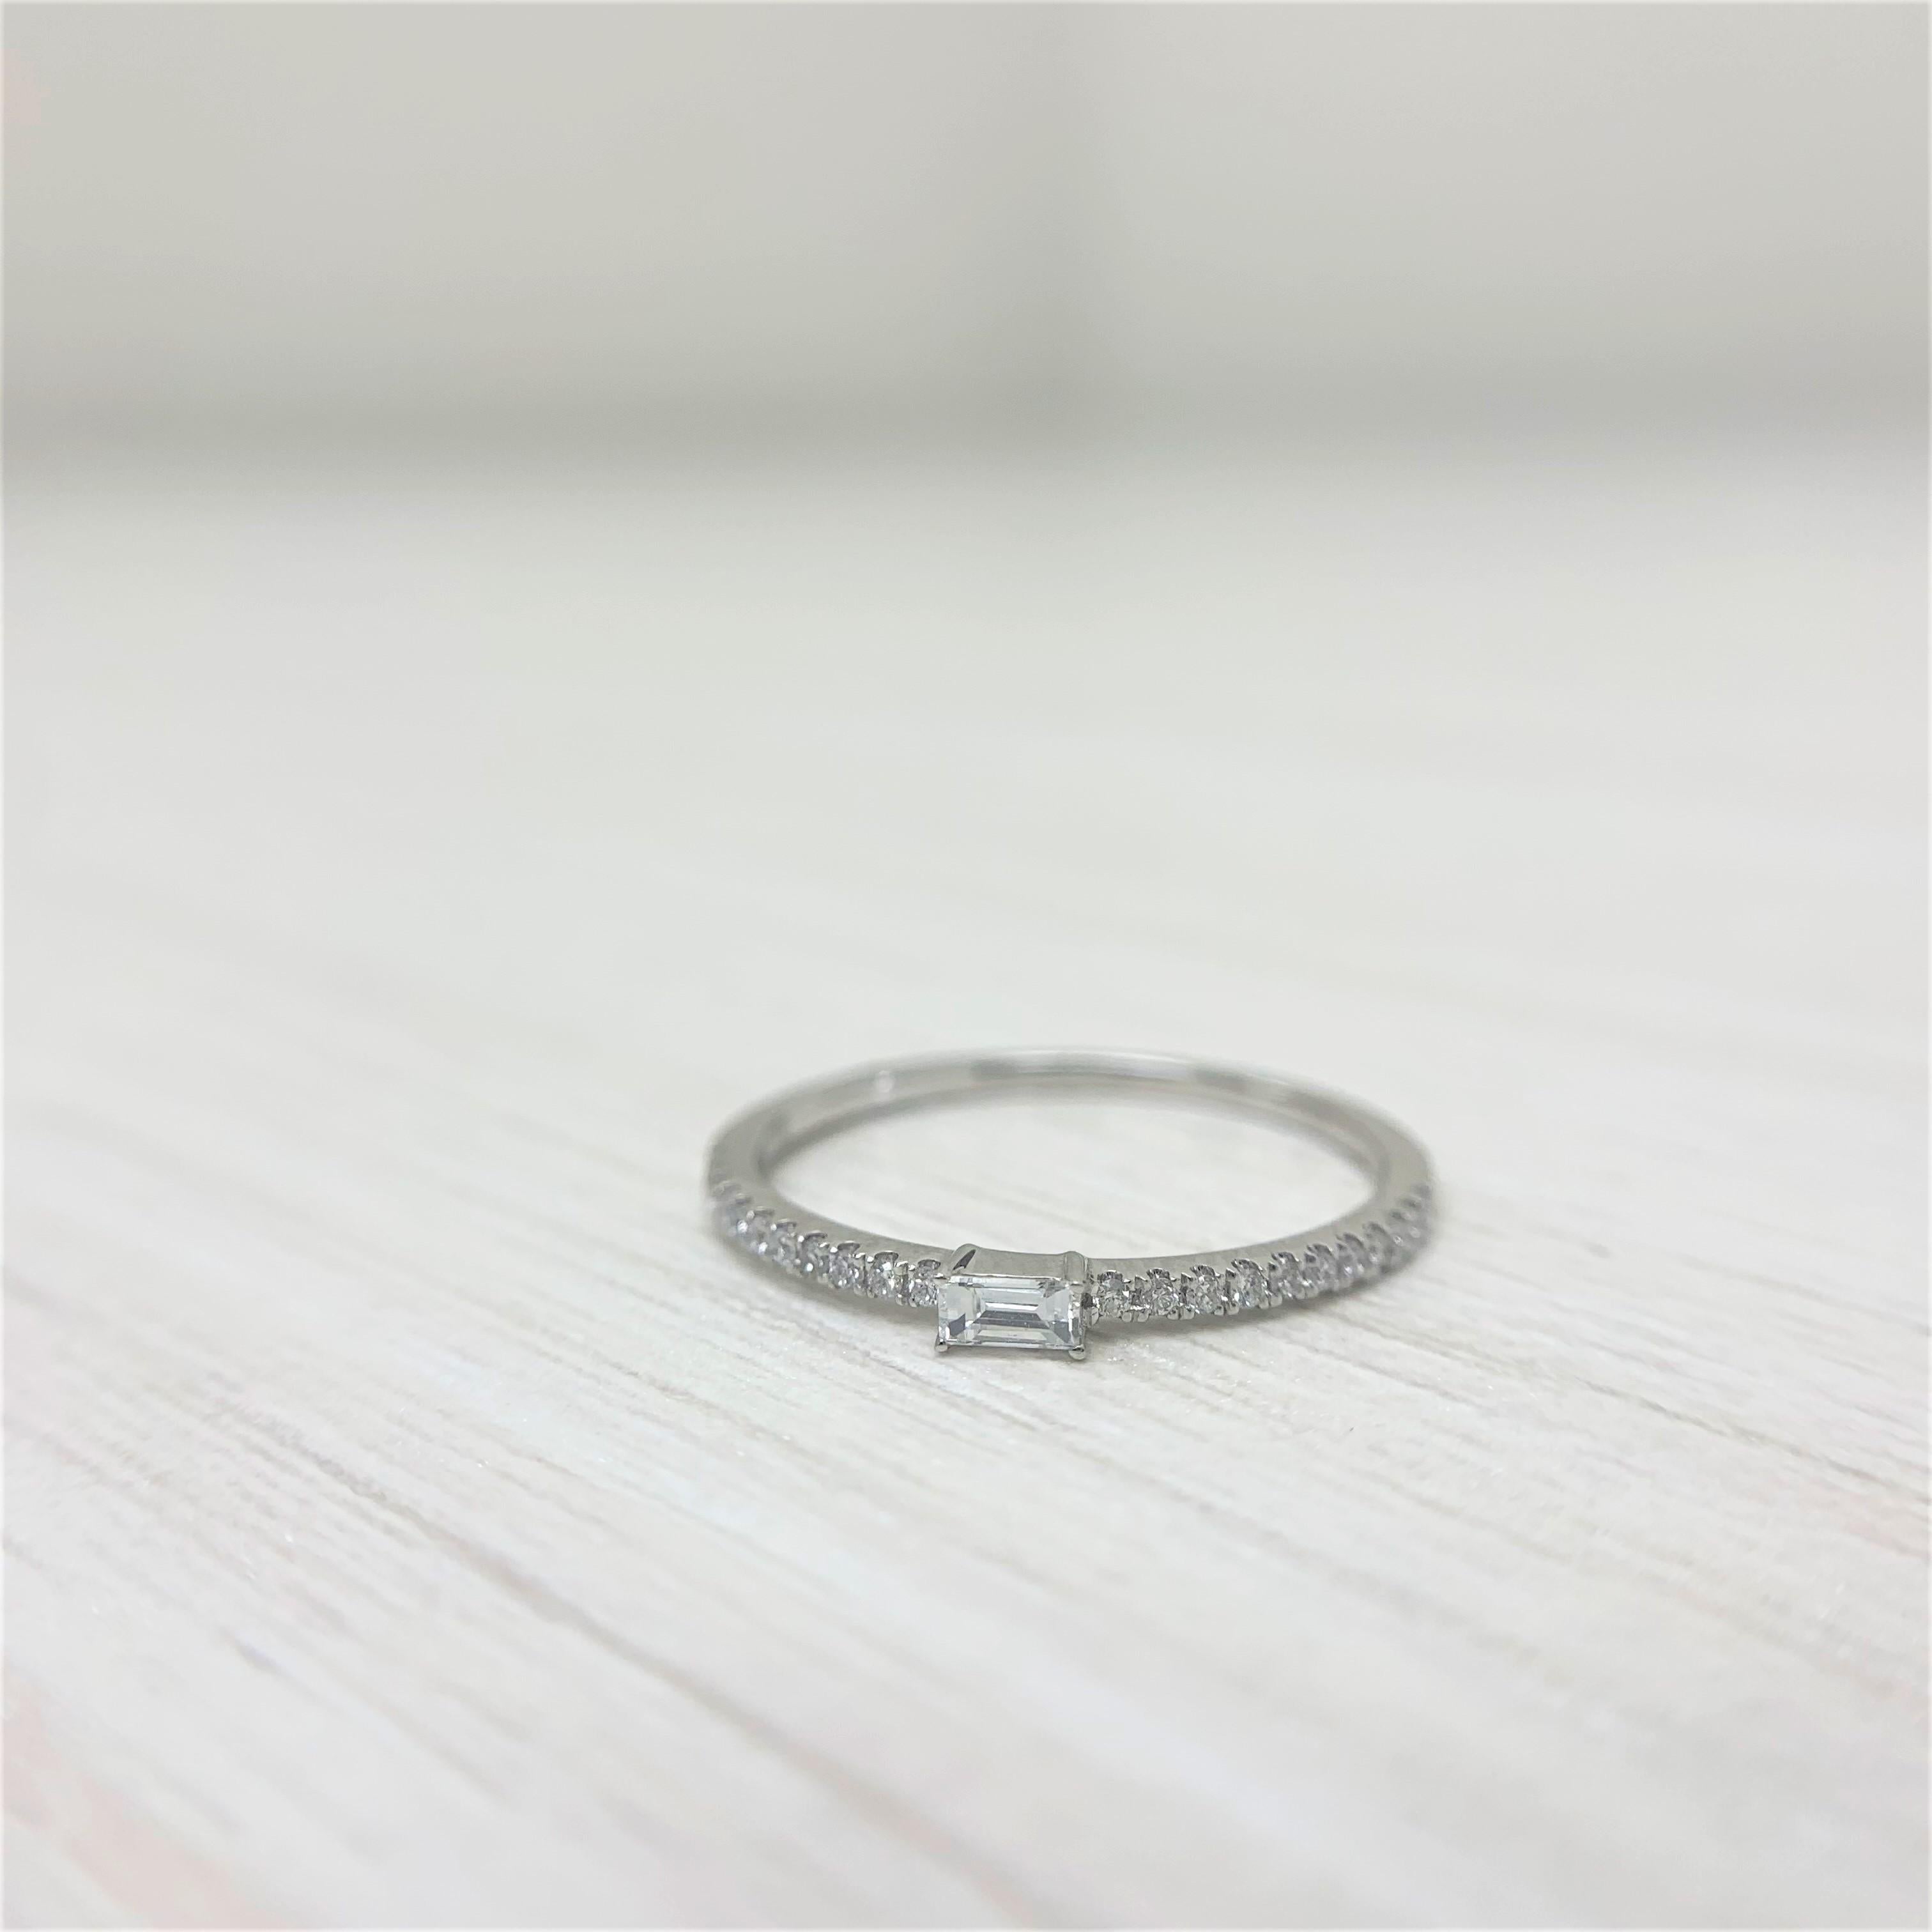 This is a Beautiful Diamond Stackable Eternity Band crafted of 14K Gold featuring 0.14 ct. Natural white diamonds Diamond Color & Clarity is GH-SI1, Can be worn stacked or alone! 
 
 14K Gold 
 0.14 ct. Natural White Diamonds 
 Diamond Color GH 
